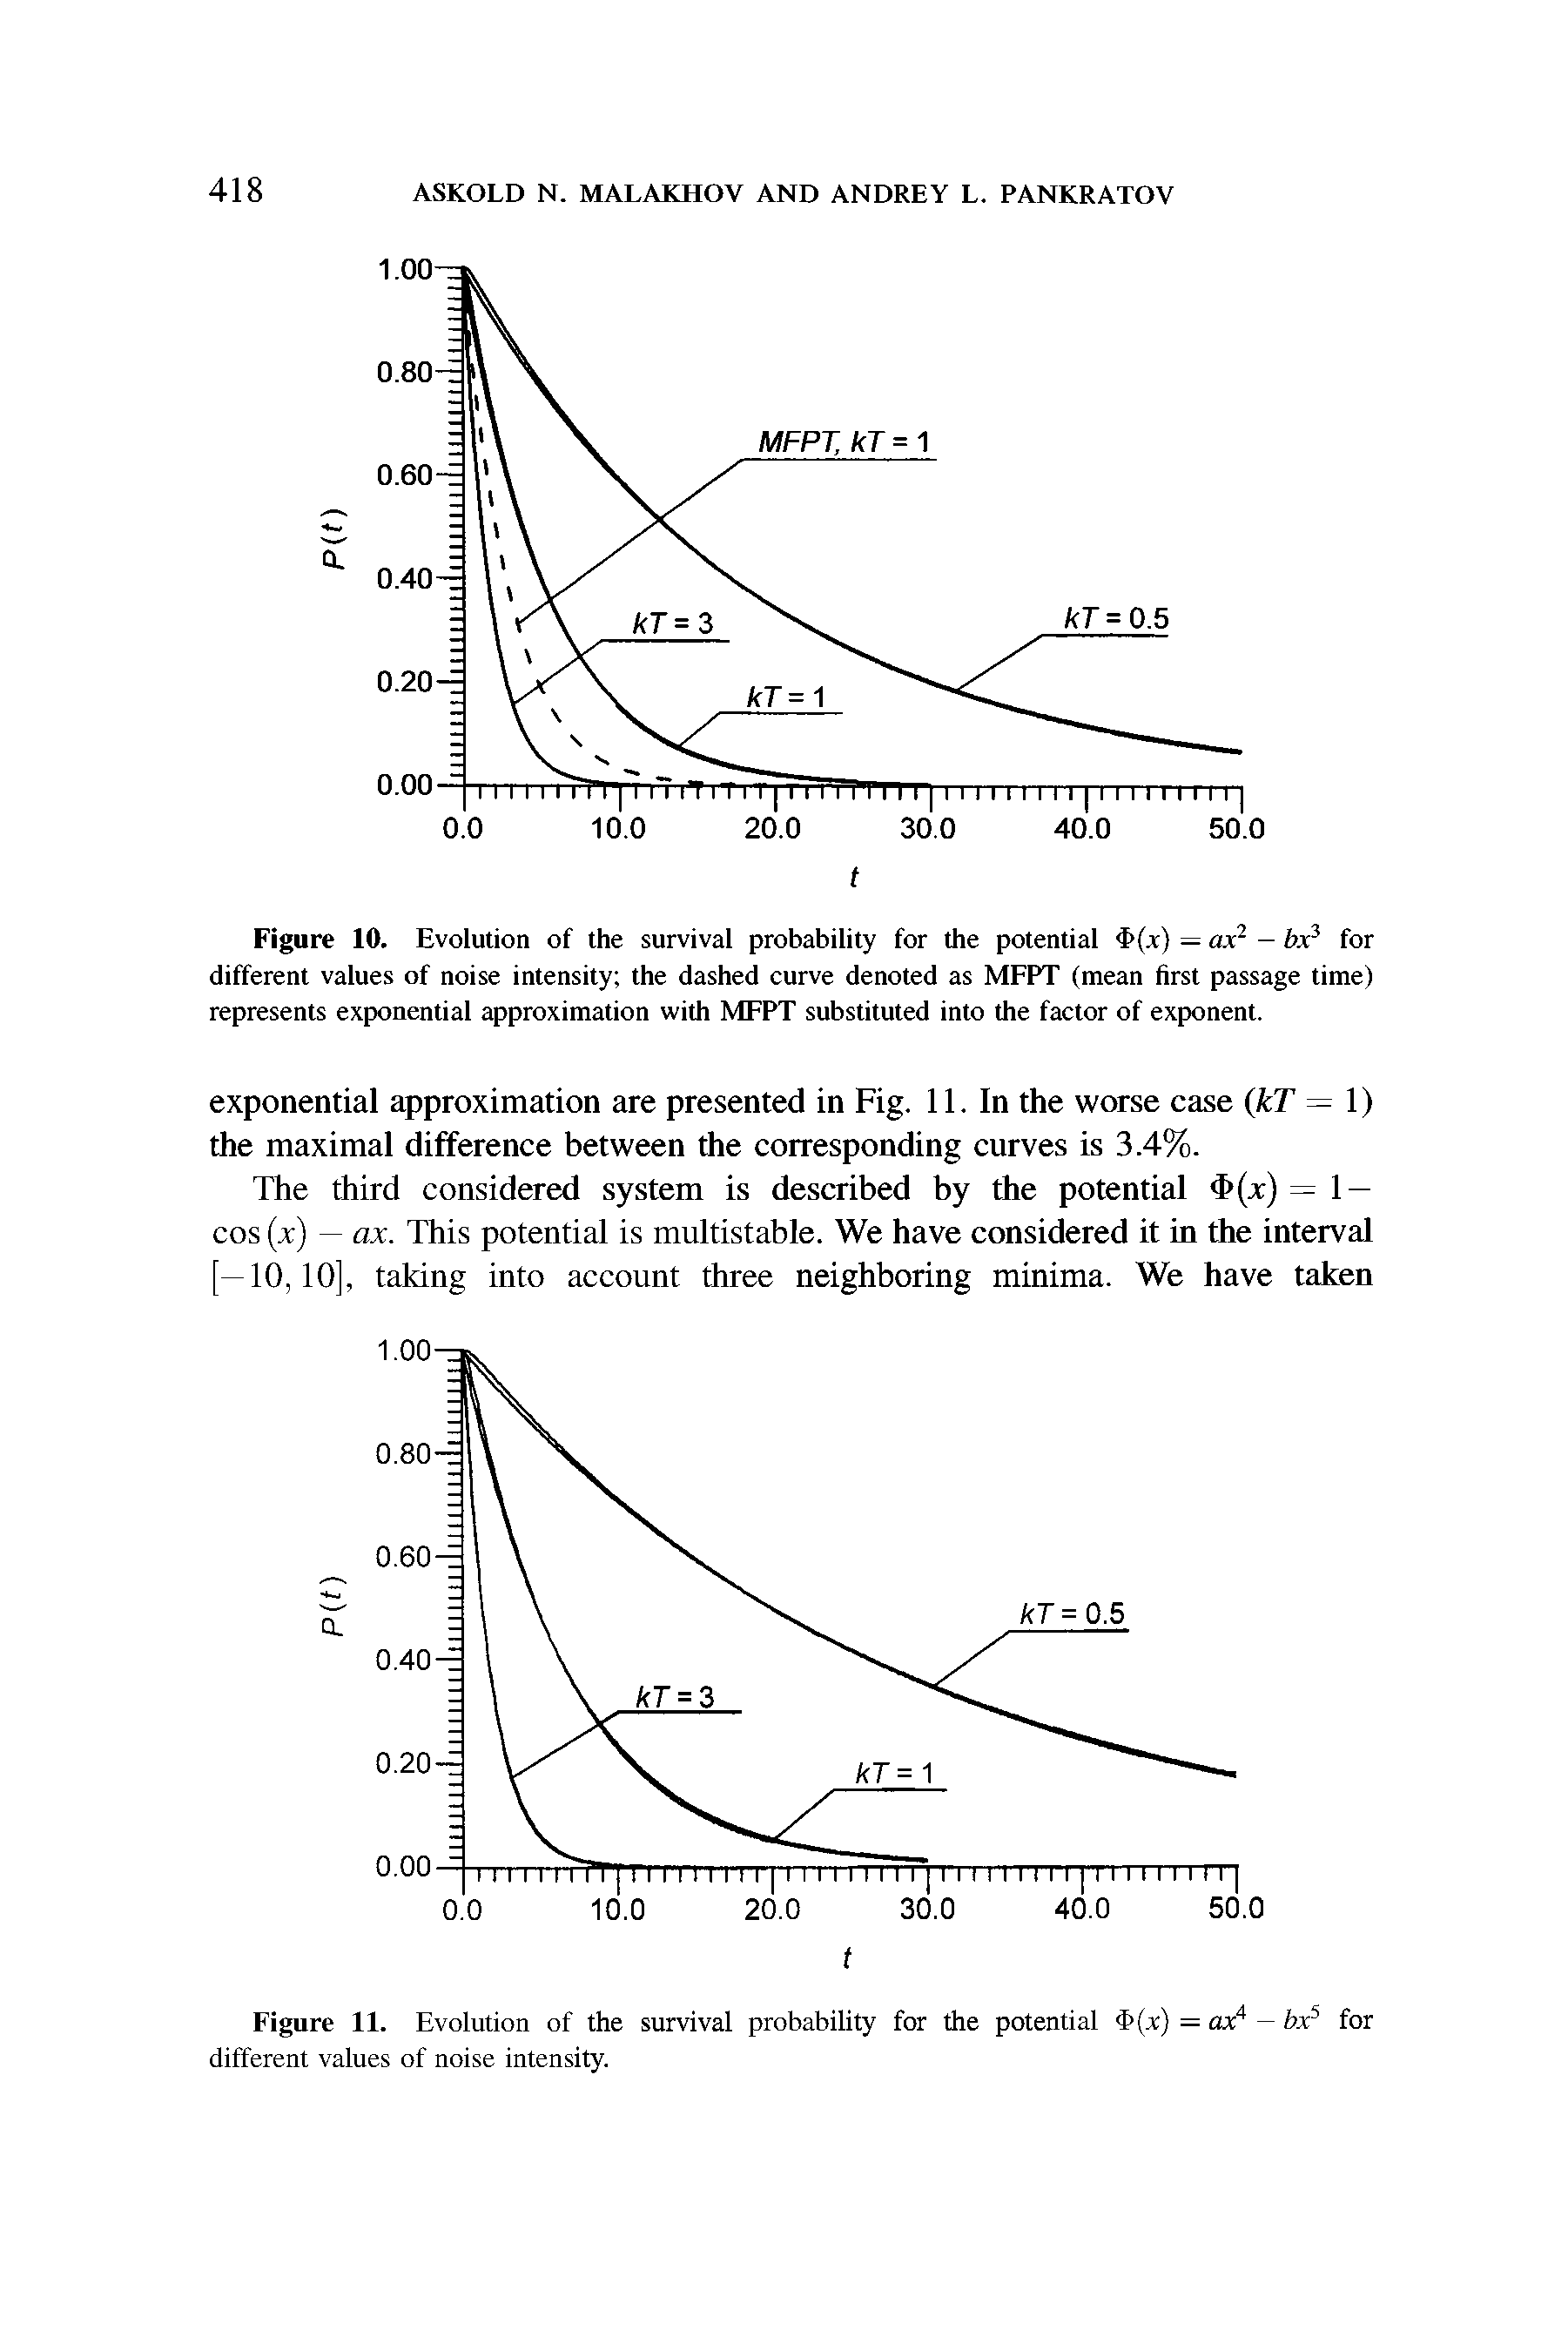 Figure 10. Evolution of the survival probability for the potential Tf.v) — ax2 - for3 for different values of noise intensity the dashed curve denoted as MFPT (mean first passage time) represents exponential approximation with MFPT substituted into the factor of exponent.